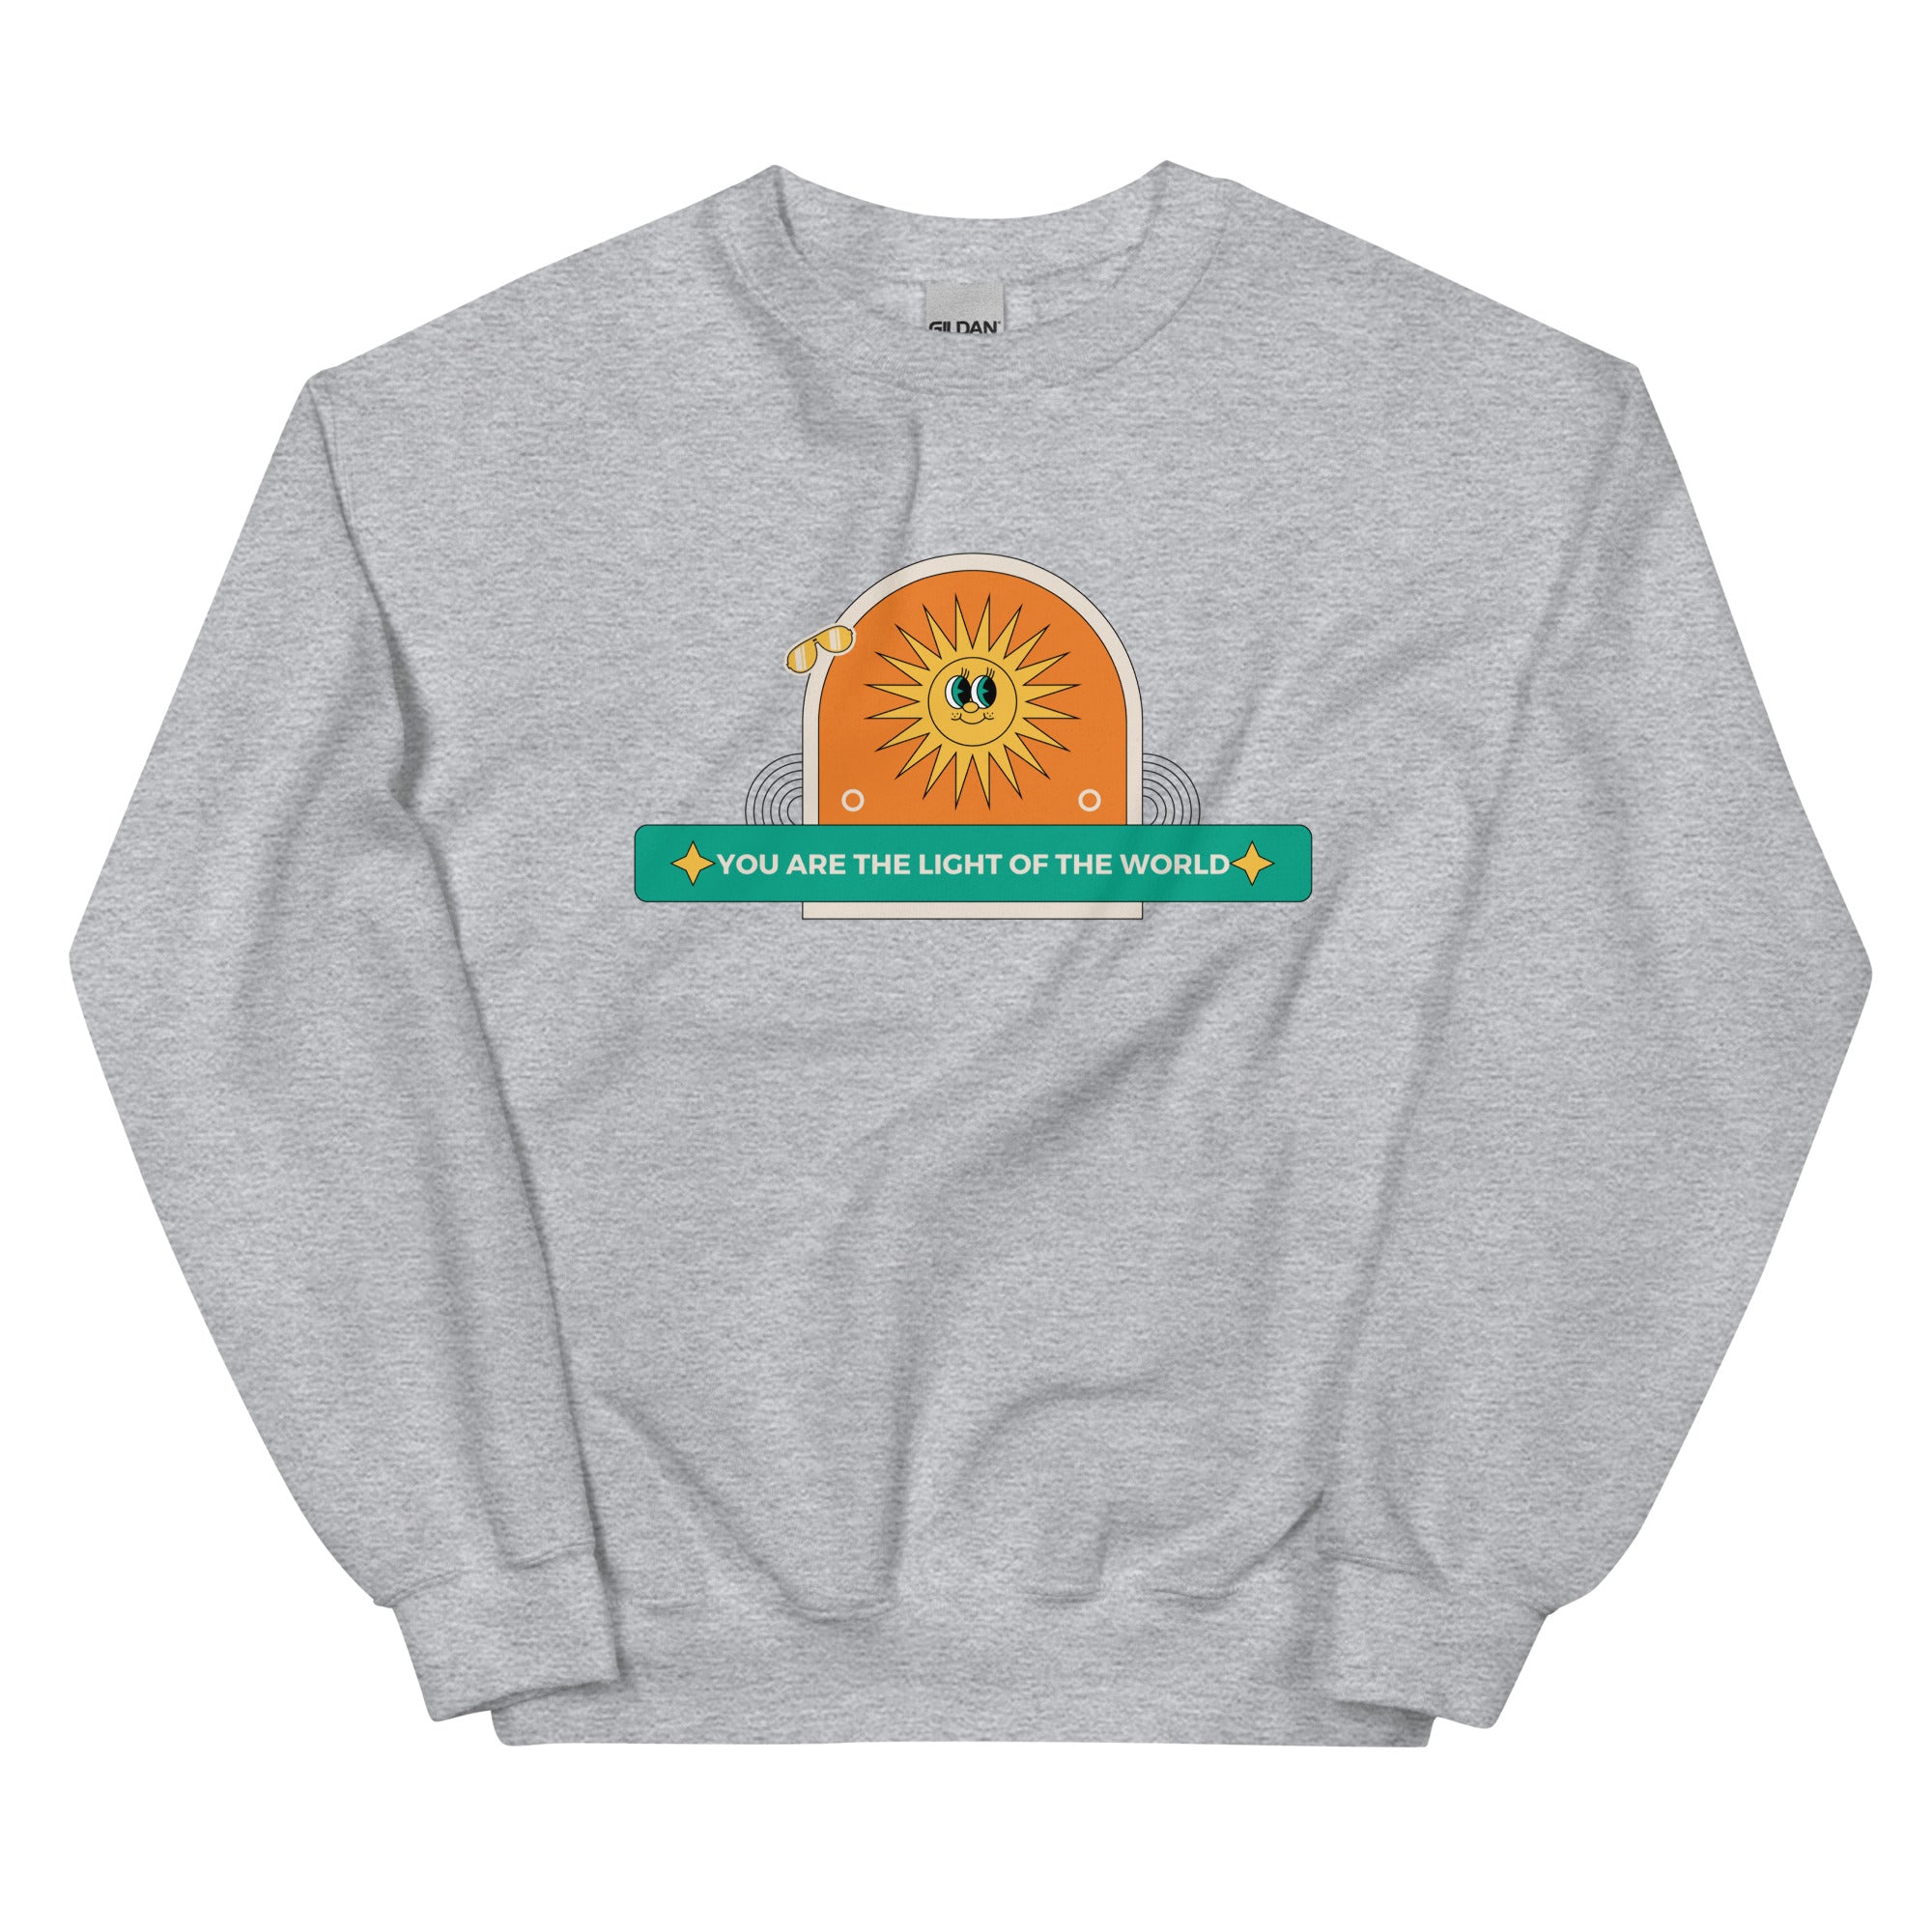 You are the light of the world Unisex Sweatshirt